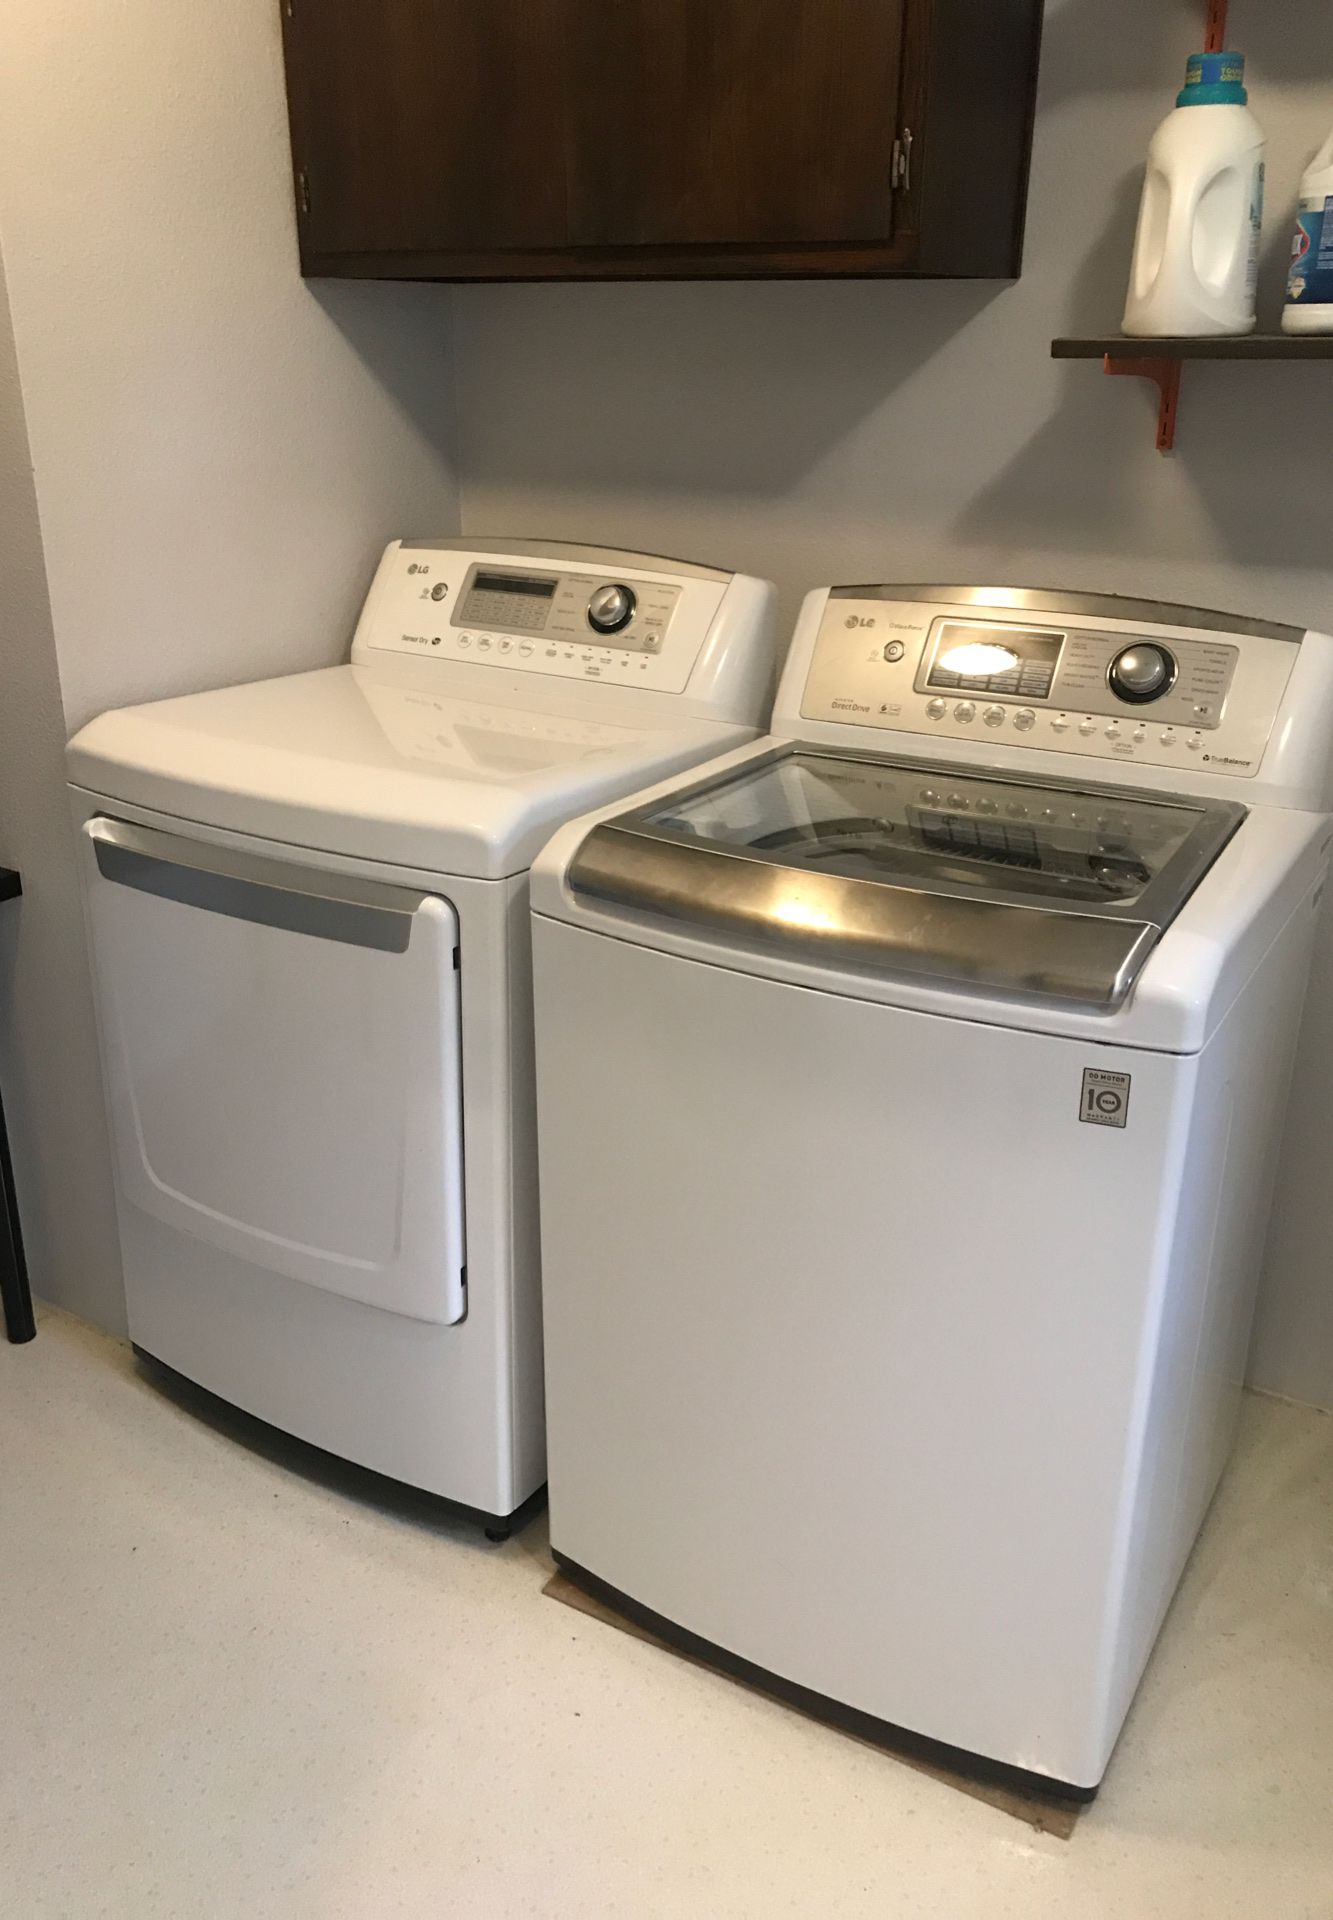 Lg washer and dryer set- electric